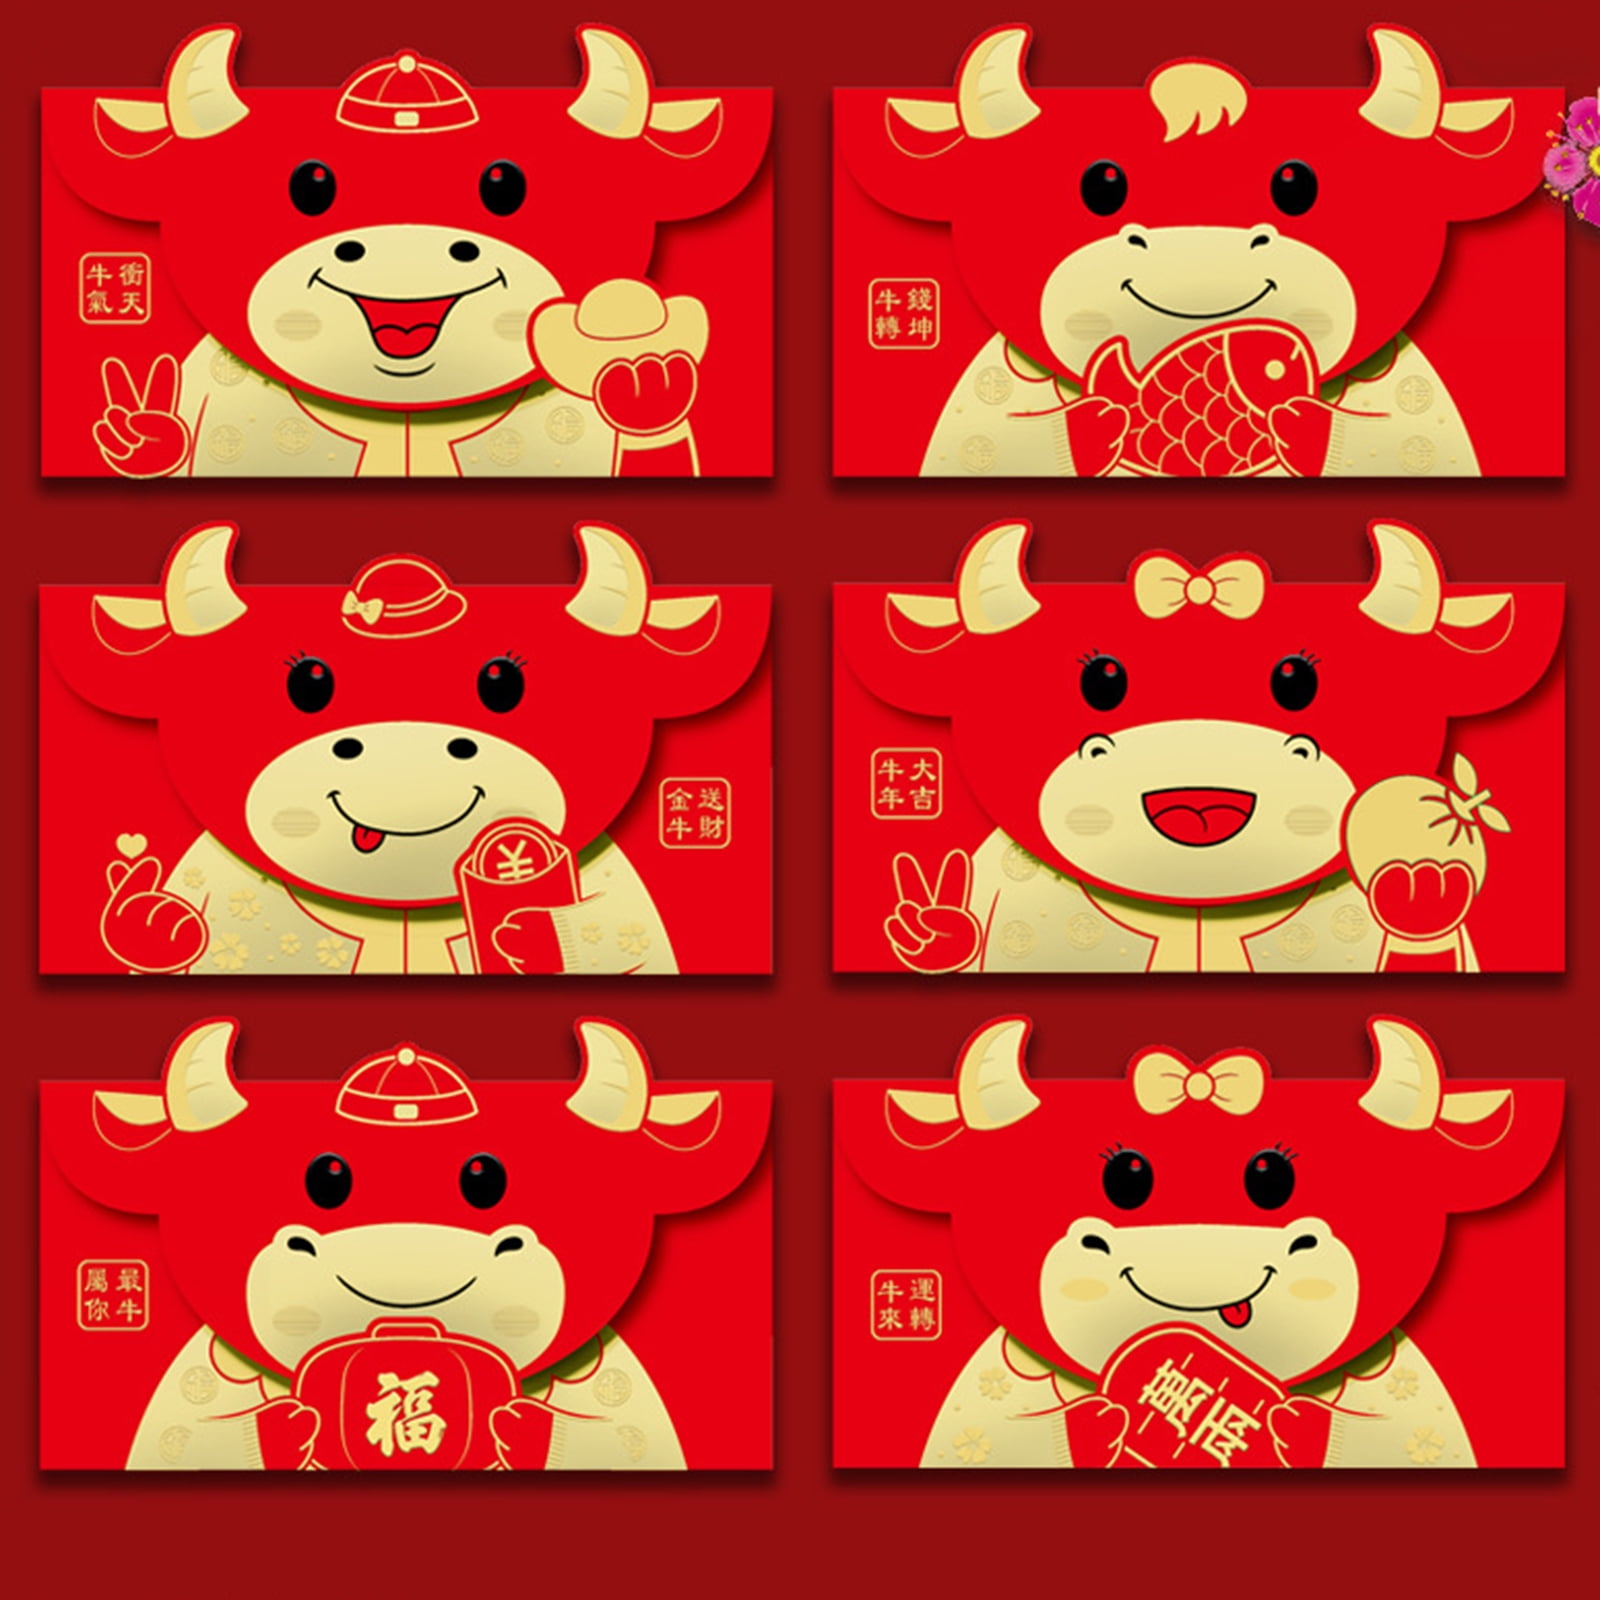 5pcs Lucky Money Envelopes Red Packets Hong Bao Chinese 2021 Ox New Year